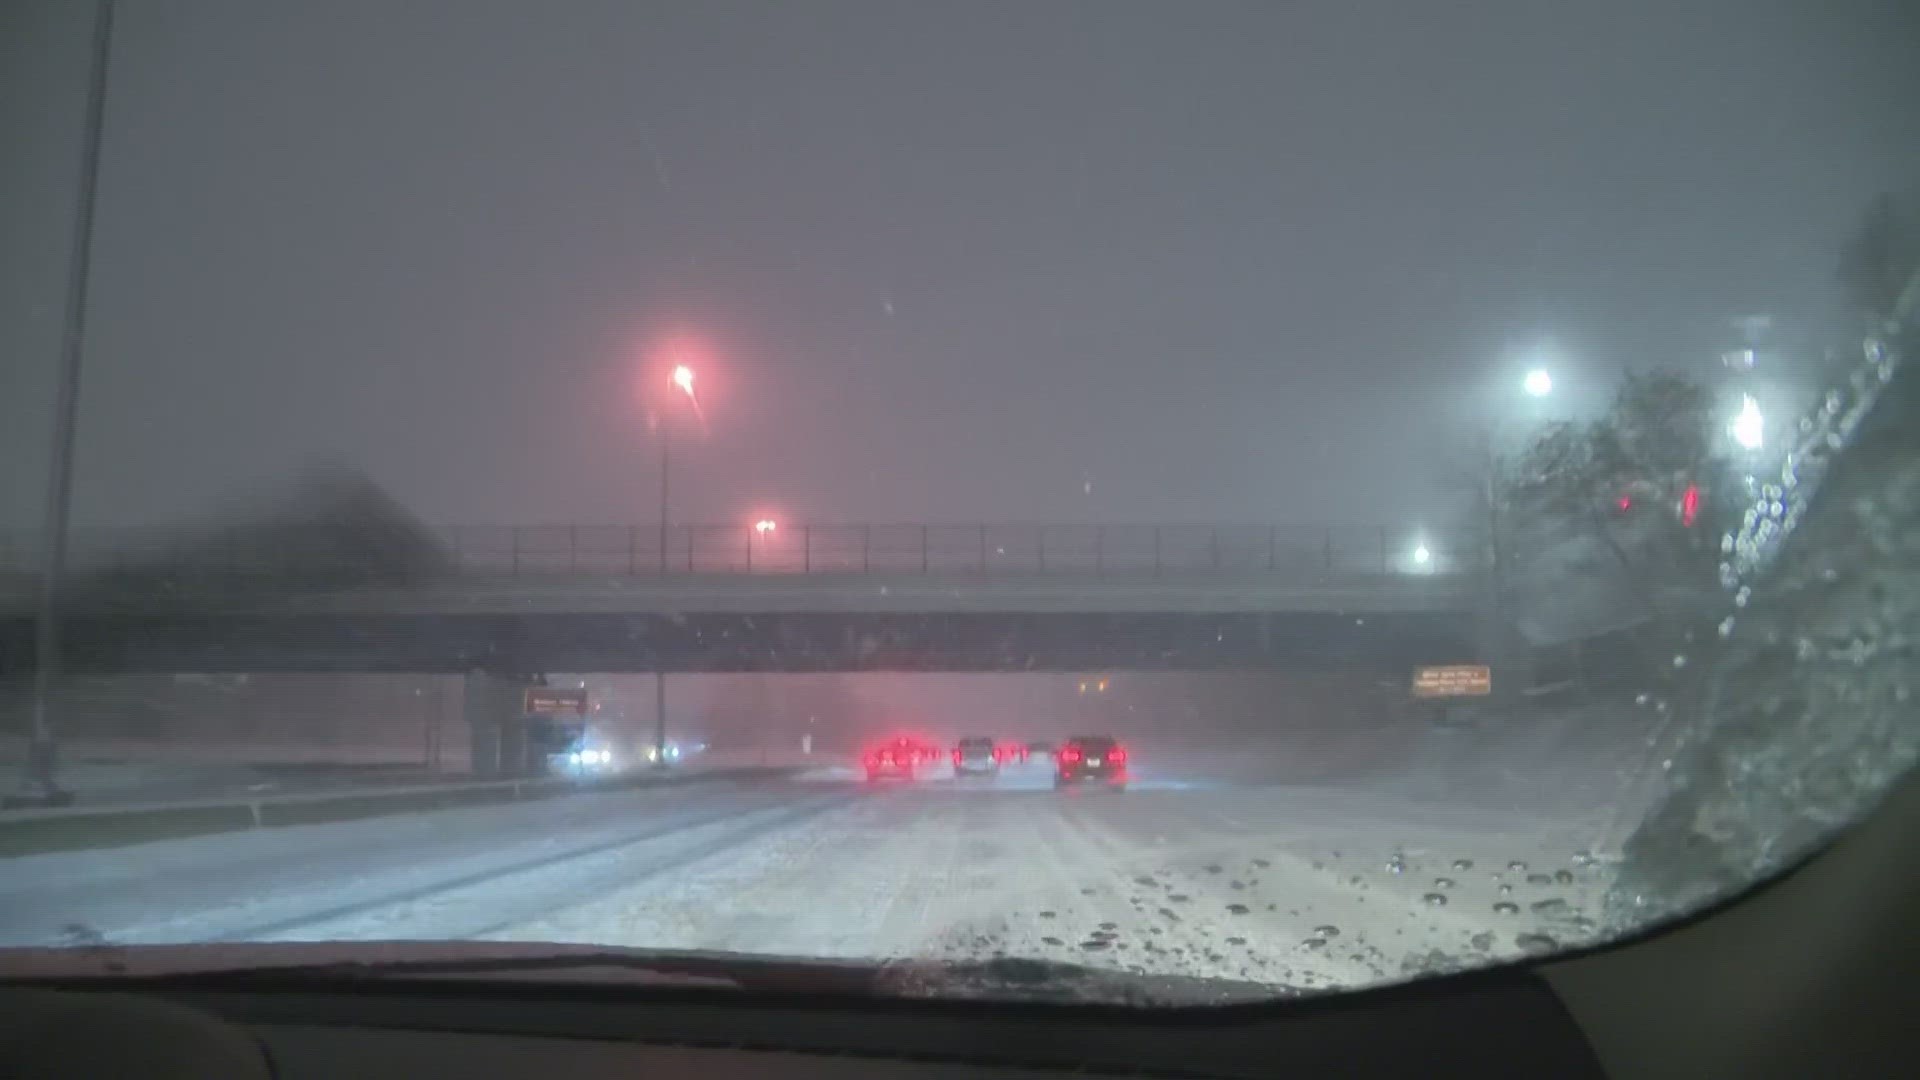 Give yourself plenty of extra time today as lake effect snow is causing some BIG problems.